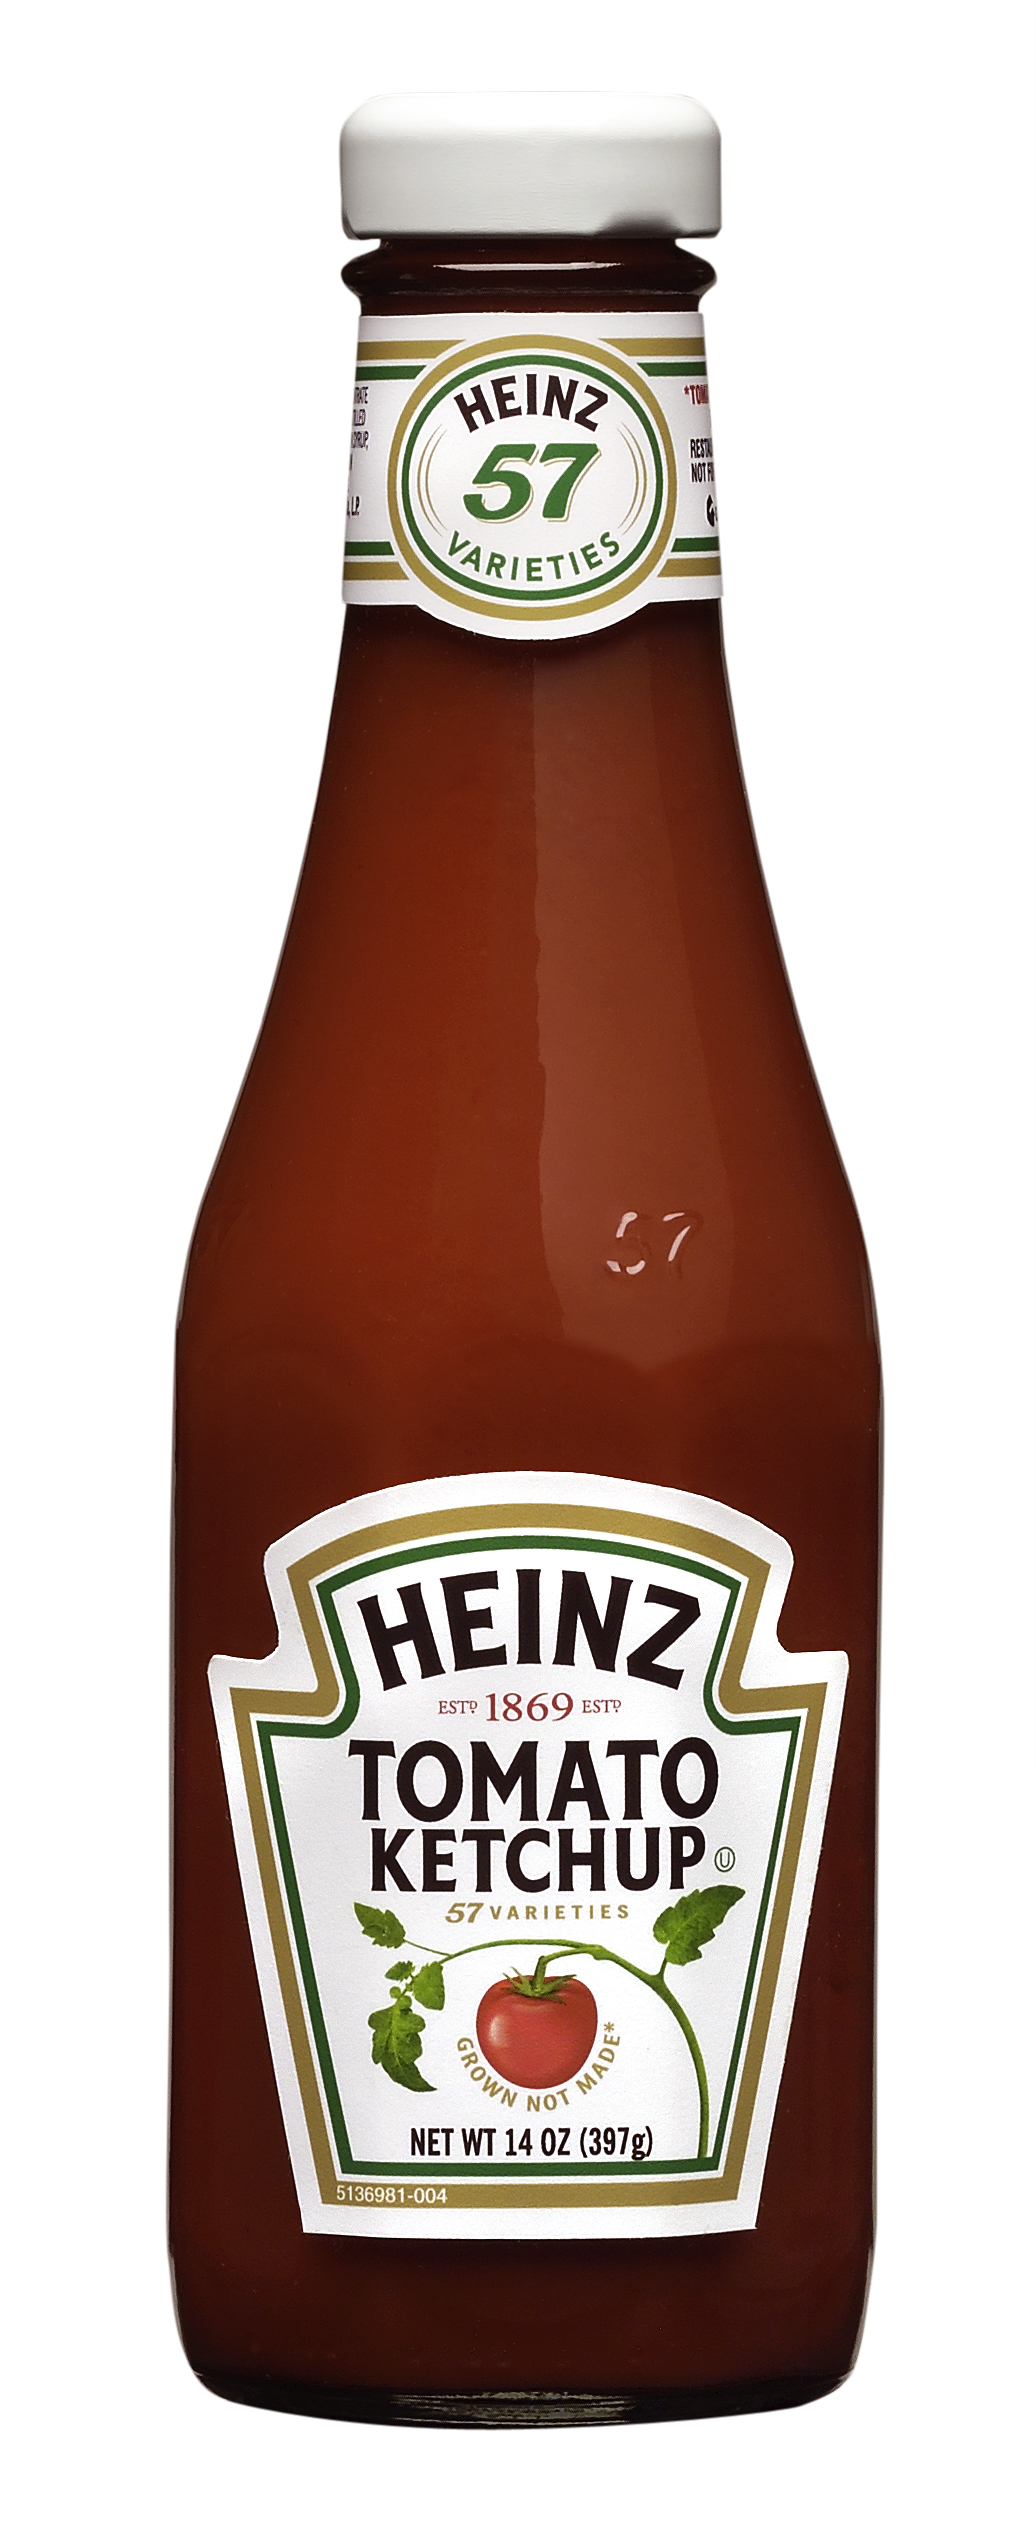 Heinz Ketchup Bottle drawing free image download